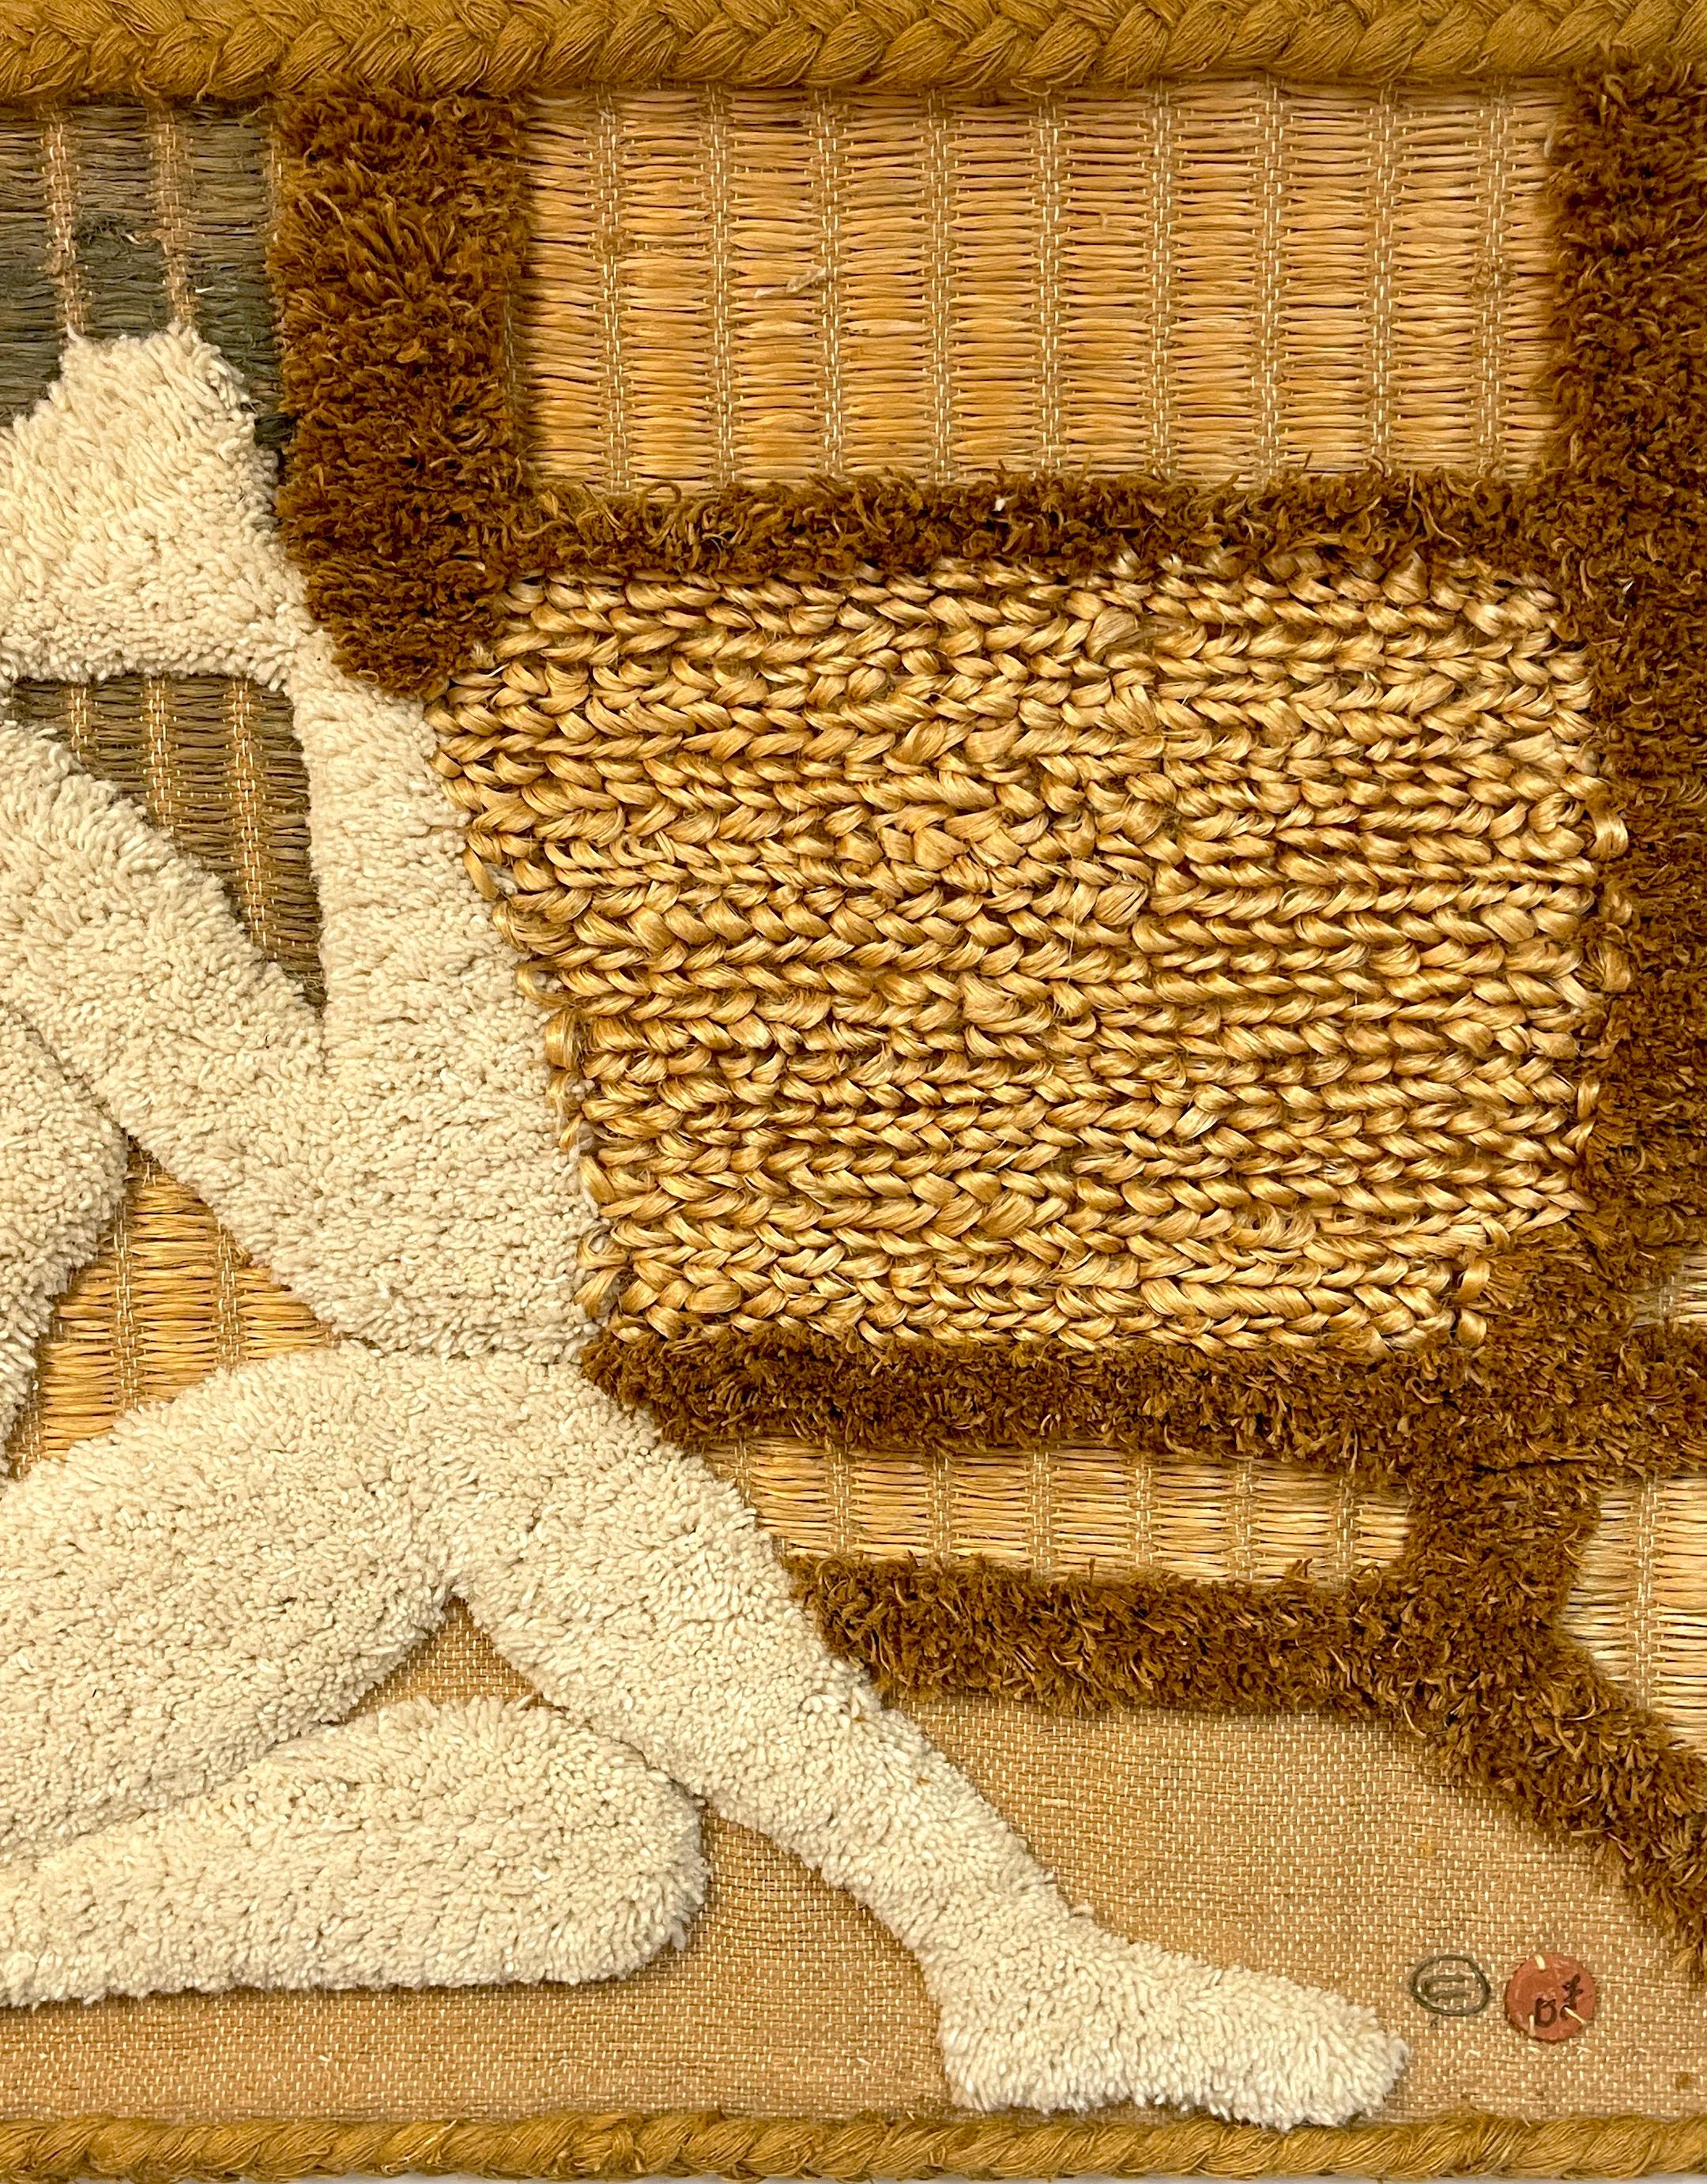 Hand-Woven Natural Fiber Art Wall Tapestry 'Seated Nude' by Don Freedman, 1978